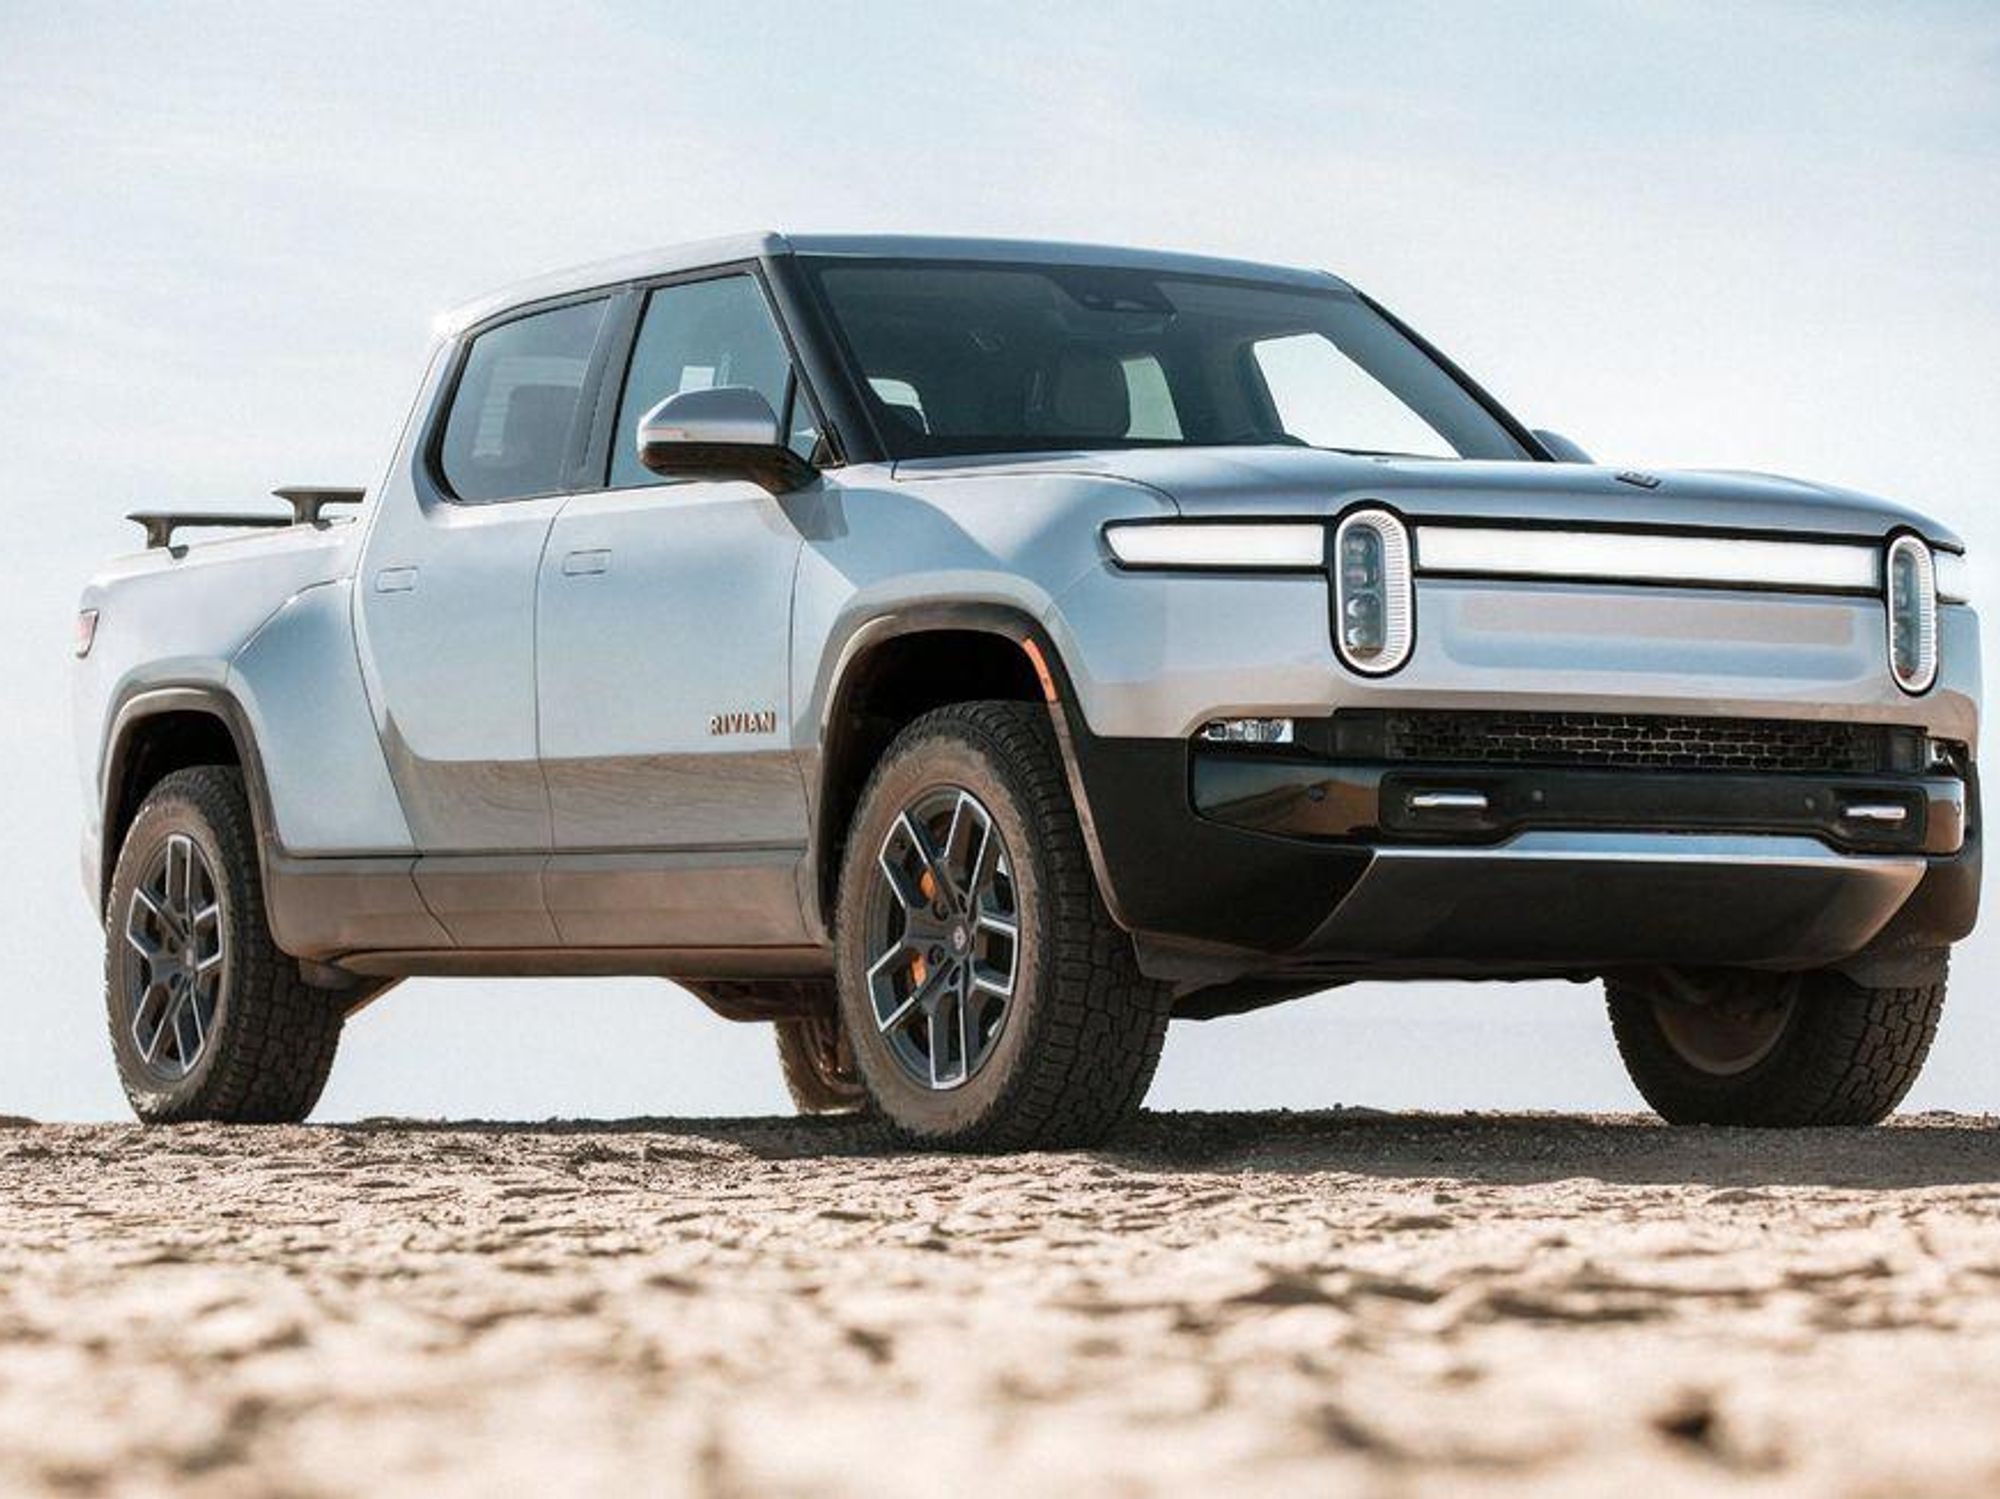 Amazon-Backed Electric Truck Maker Rivian Eyes $55 Billion Valuation in Upcoming IPO